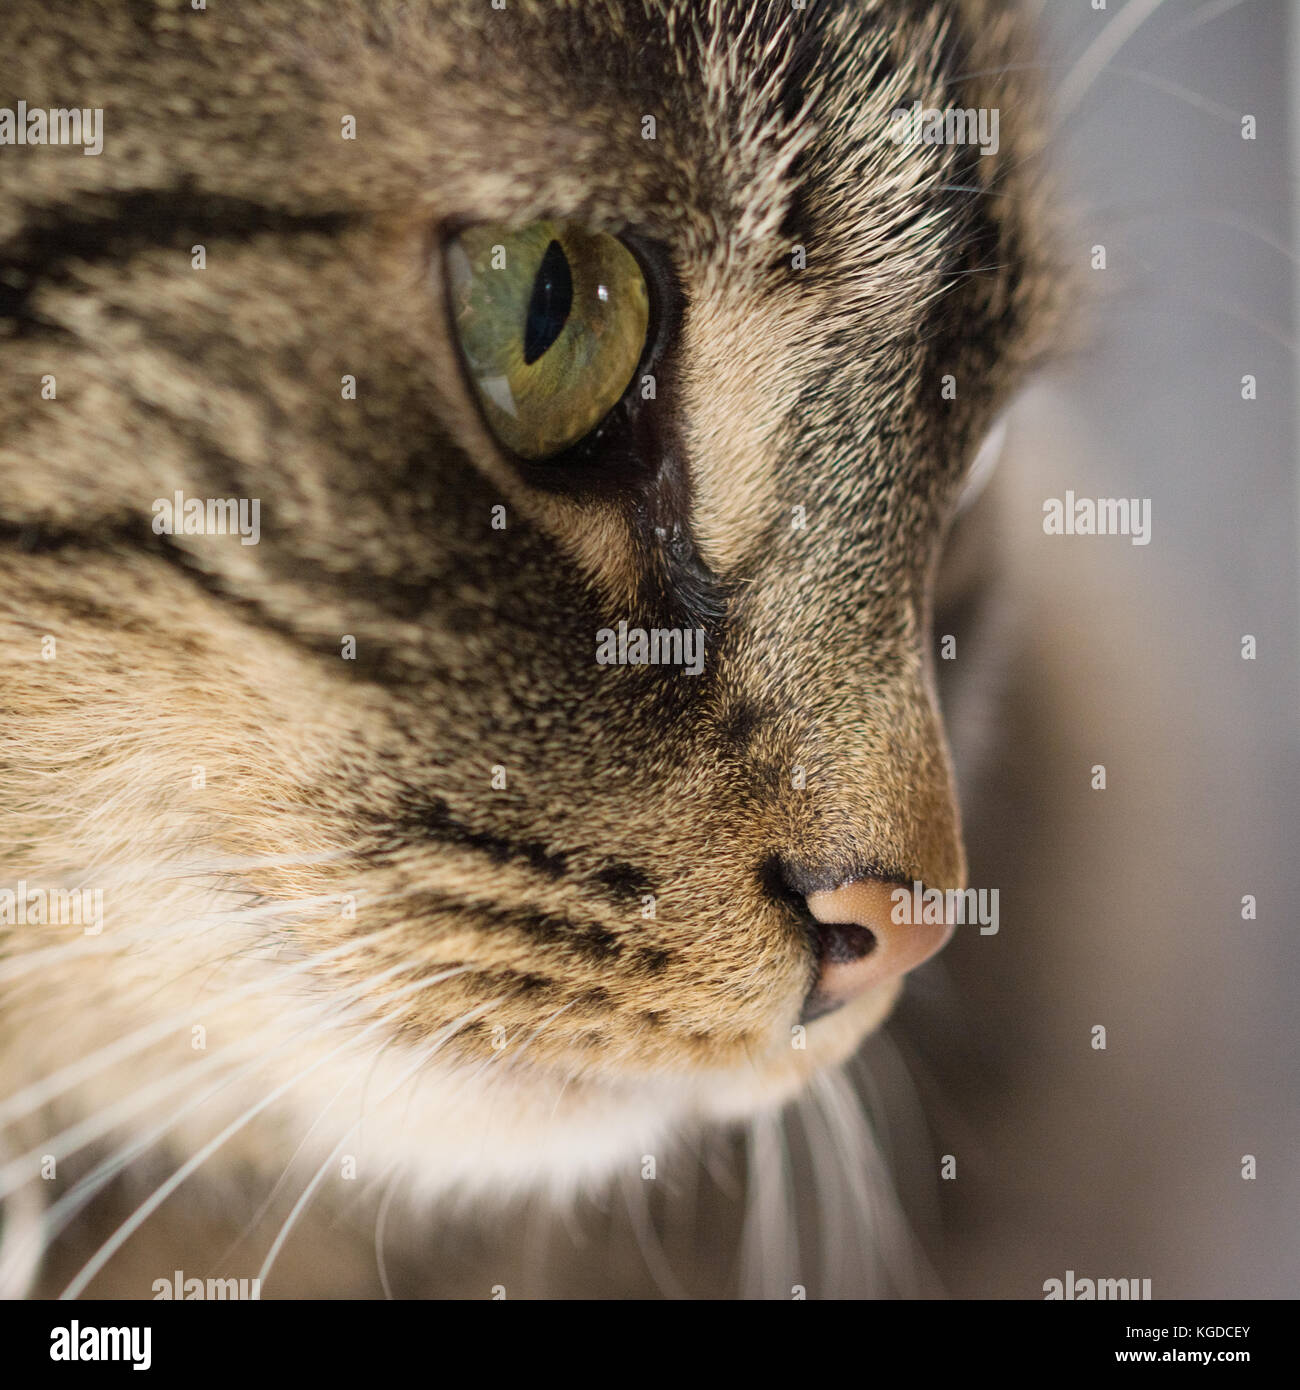 Close-up of cat's face with big, green eyes and white whiskers Stock Photo